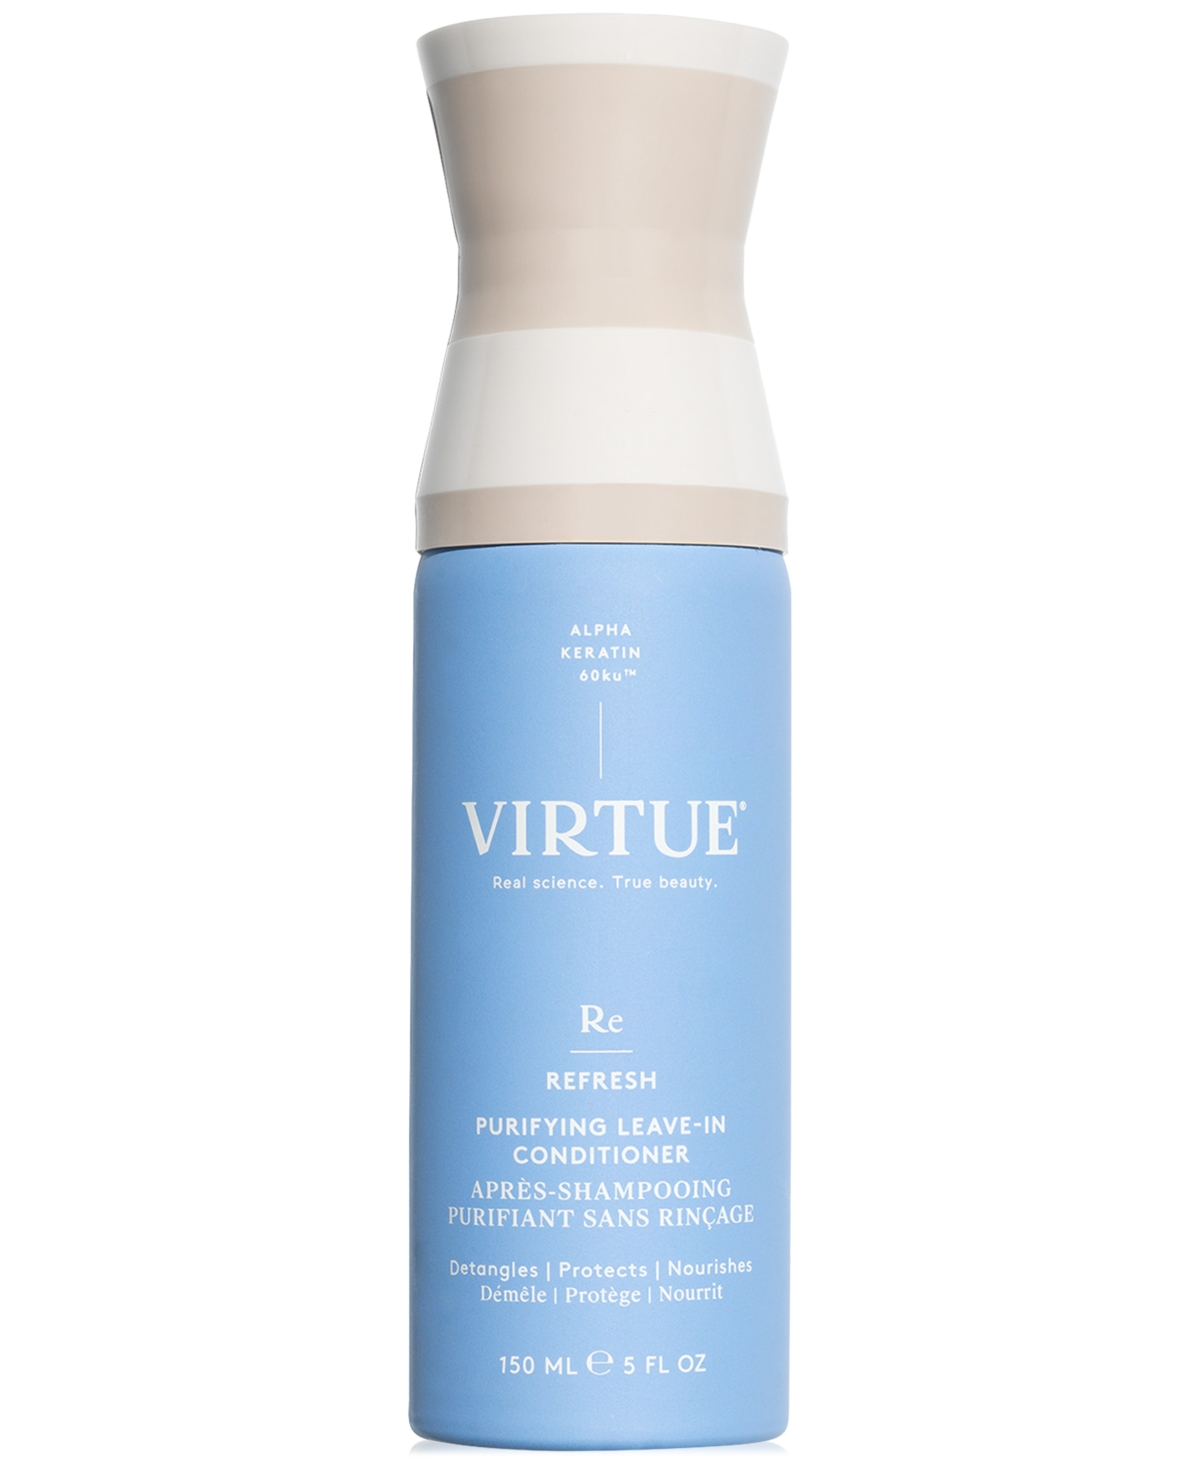 Virtue Refresh Purifying Leave-in Conditioner, 150 ml